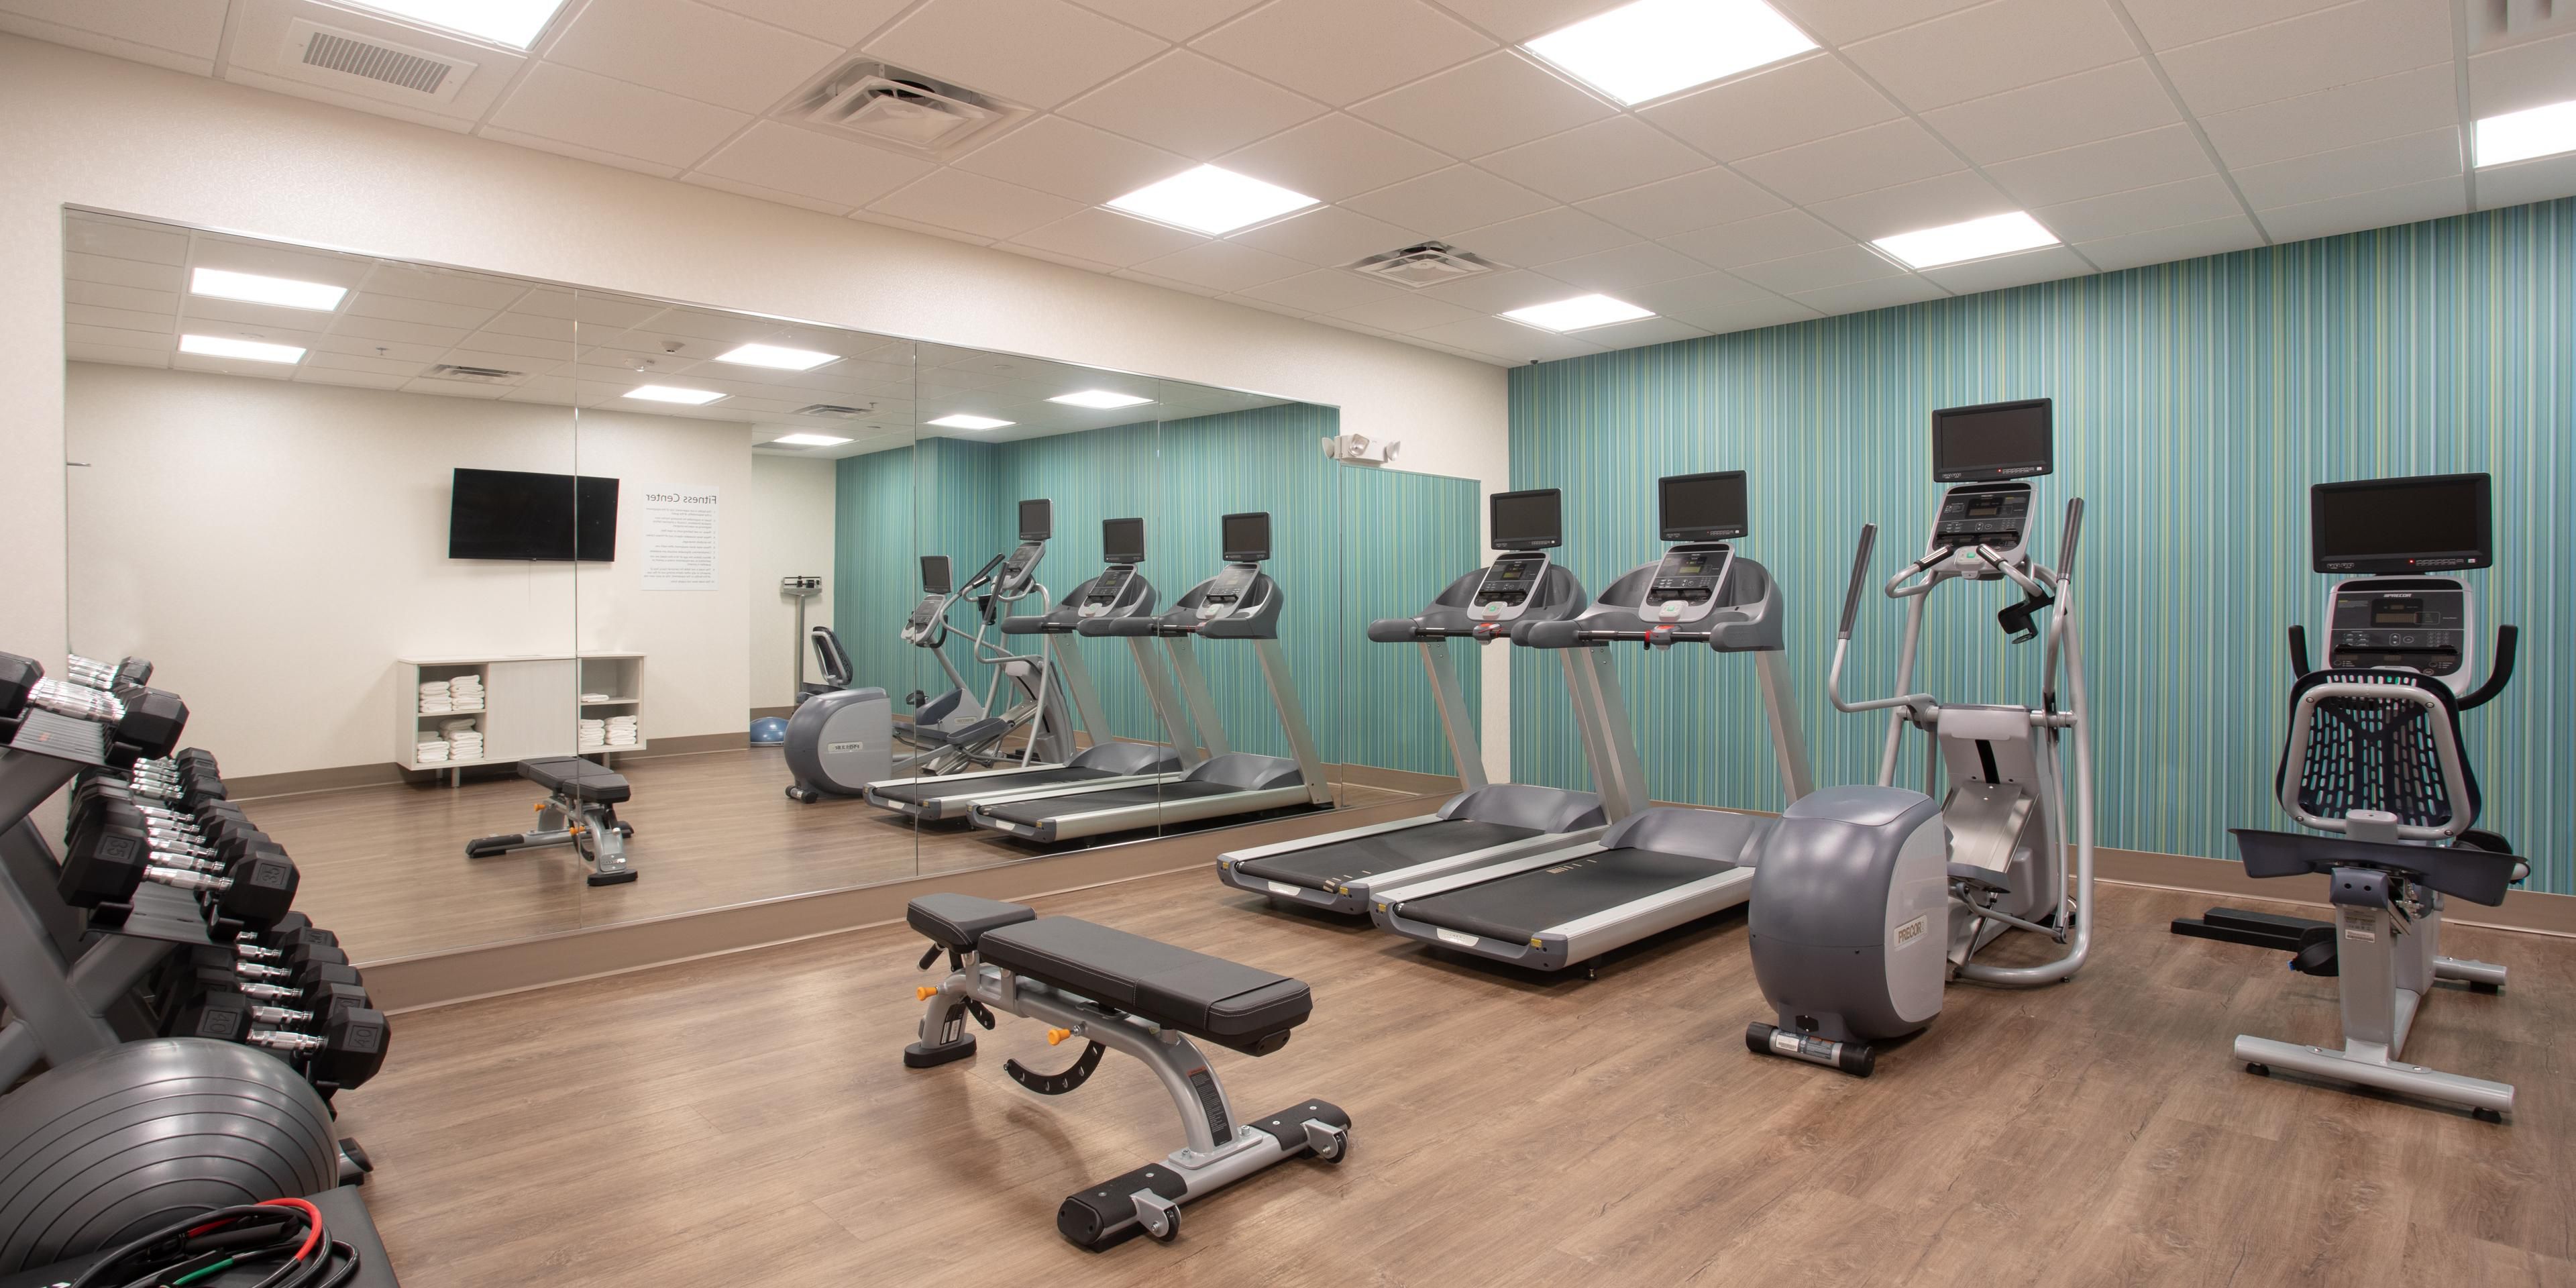 Enjoy our 24 Hour Fitness Center featuring PRECOR cardio equipment, free weights, a bosu and stability ball, and resistance bands.